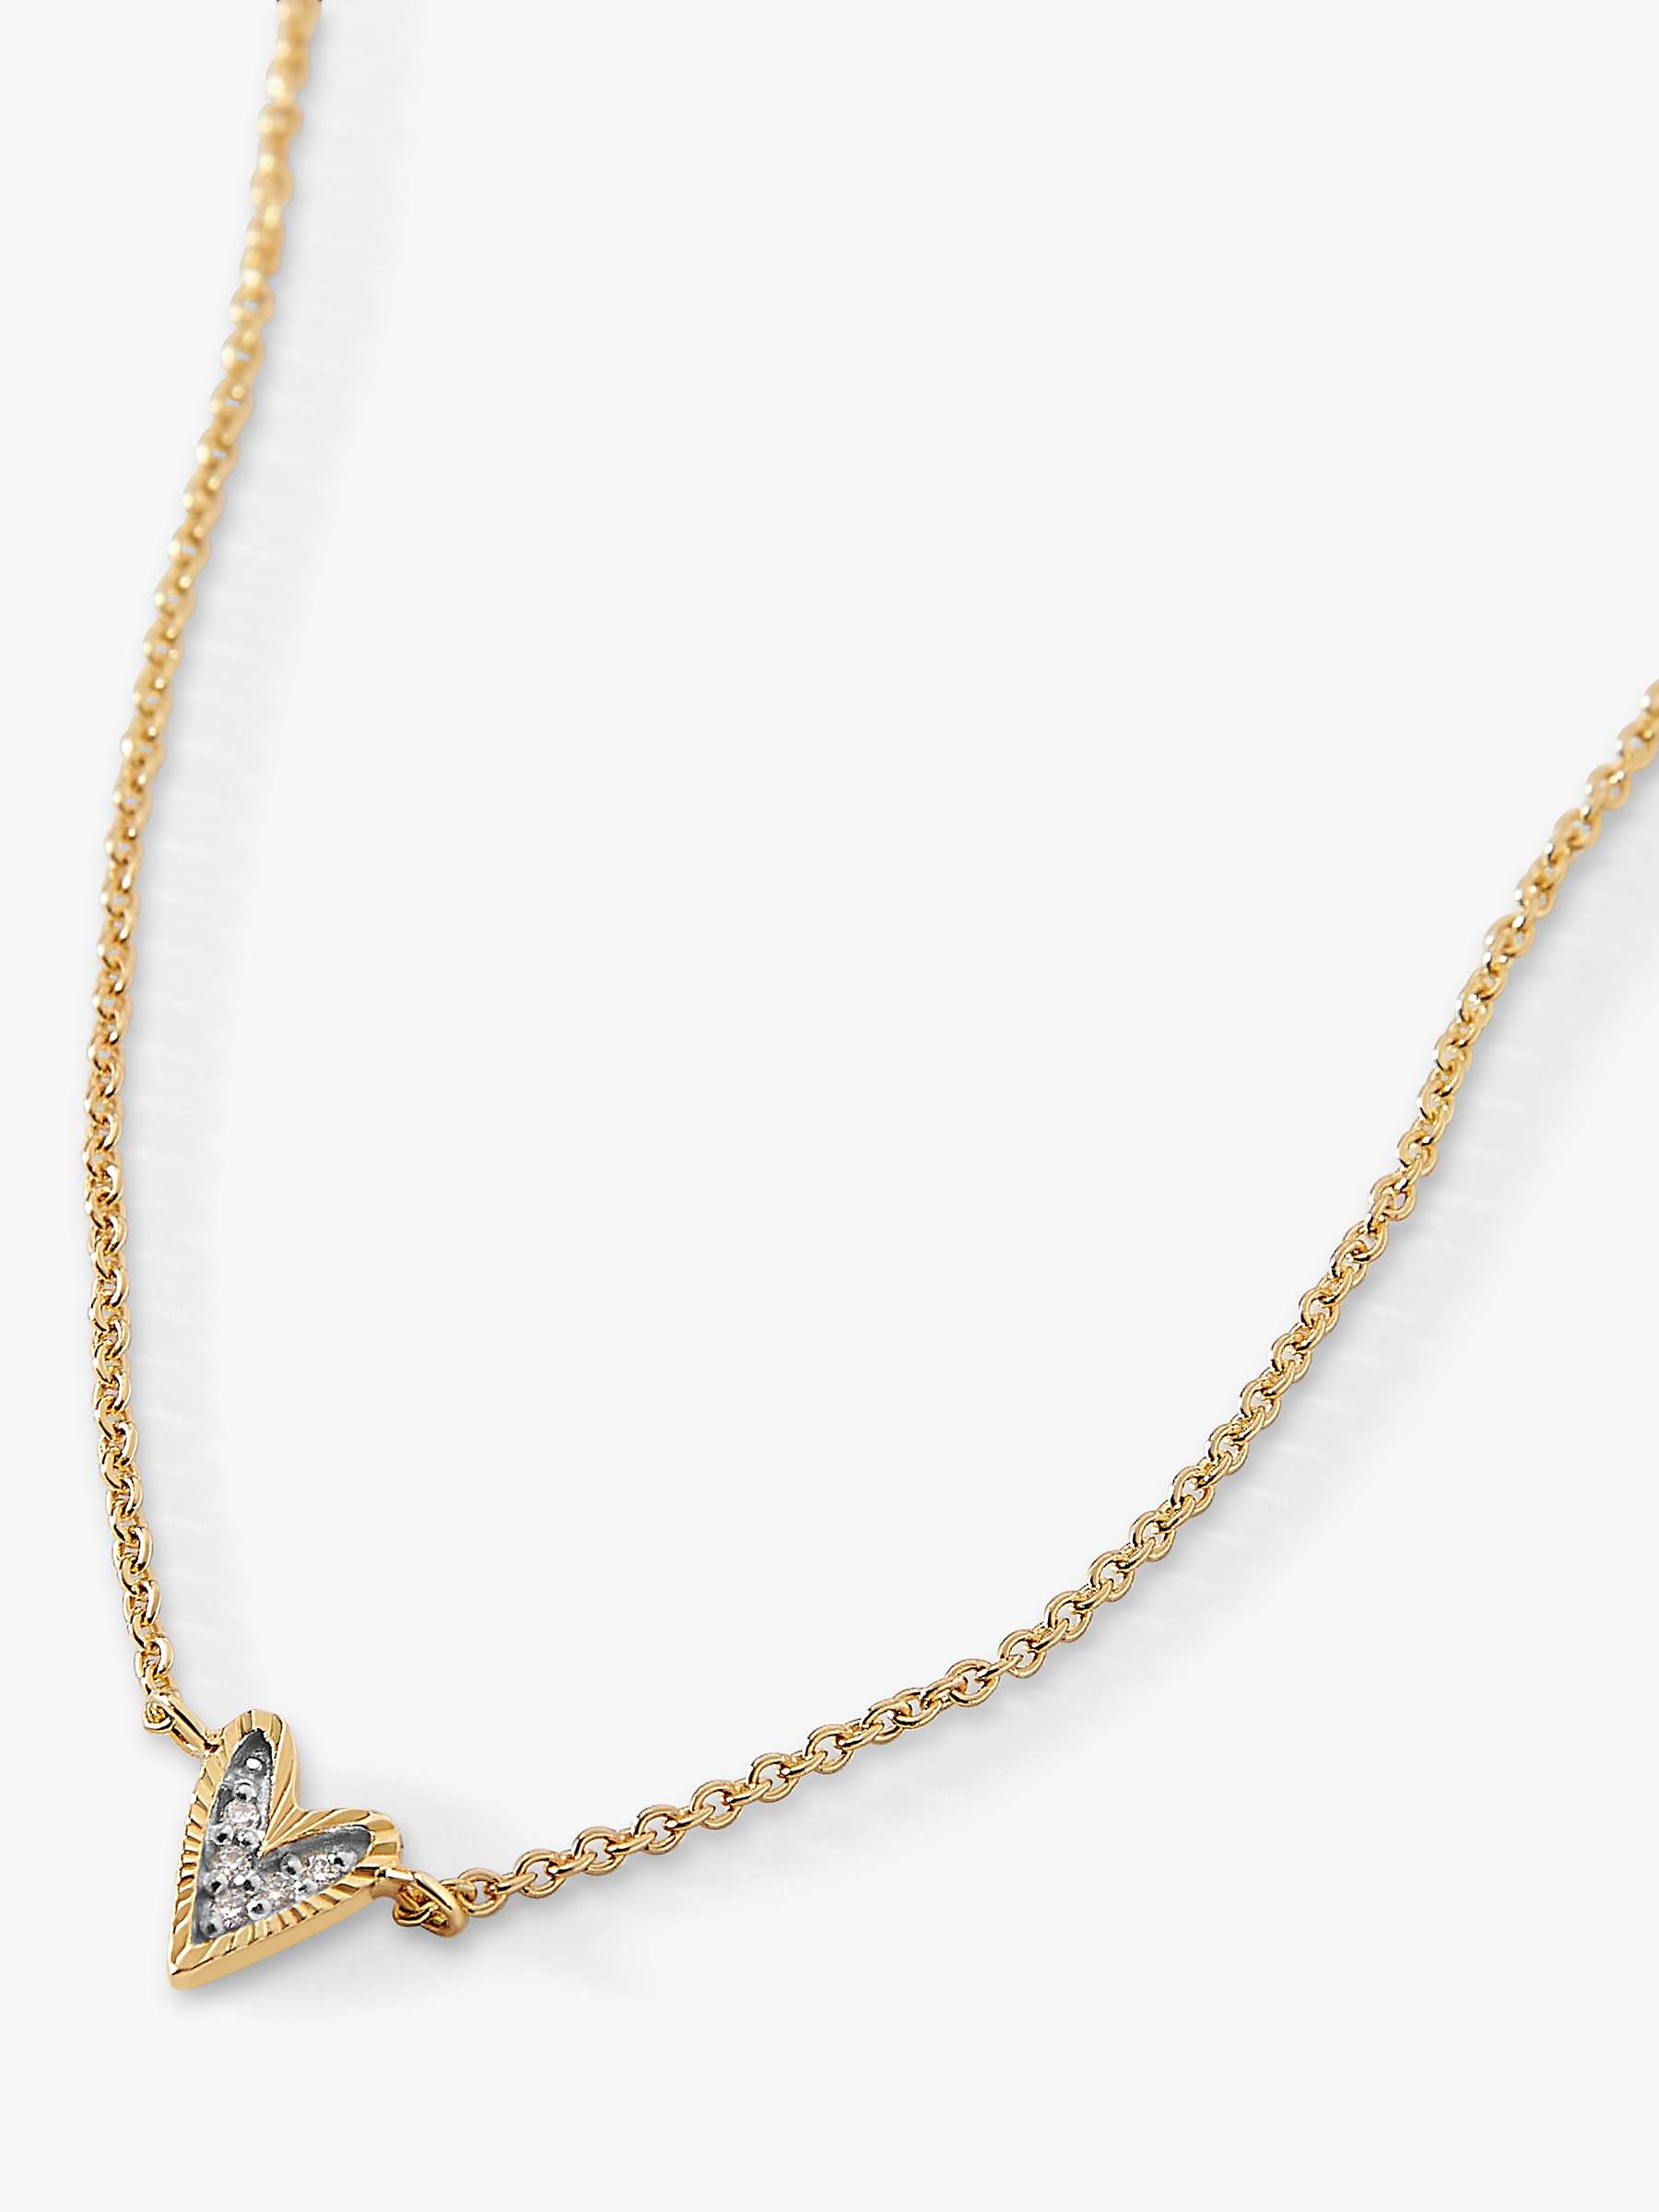 Buy Edge of Ember 14ct Gold Diamond Heart Pendant Necklace Online at johnlewis.com